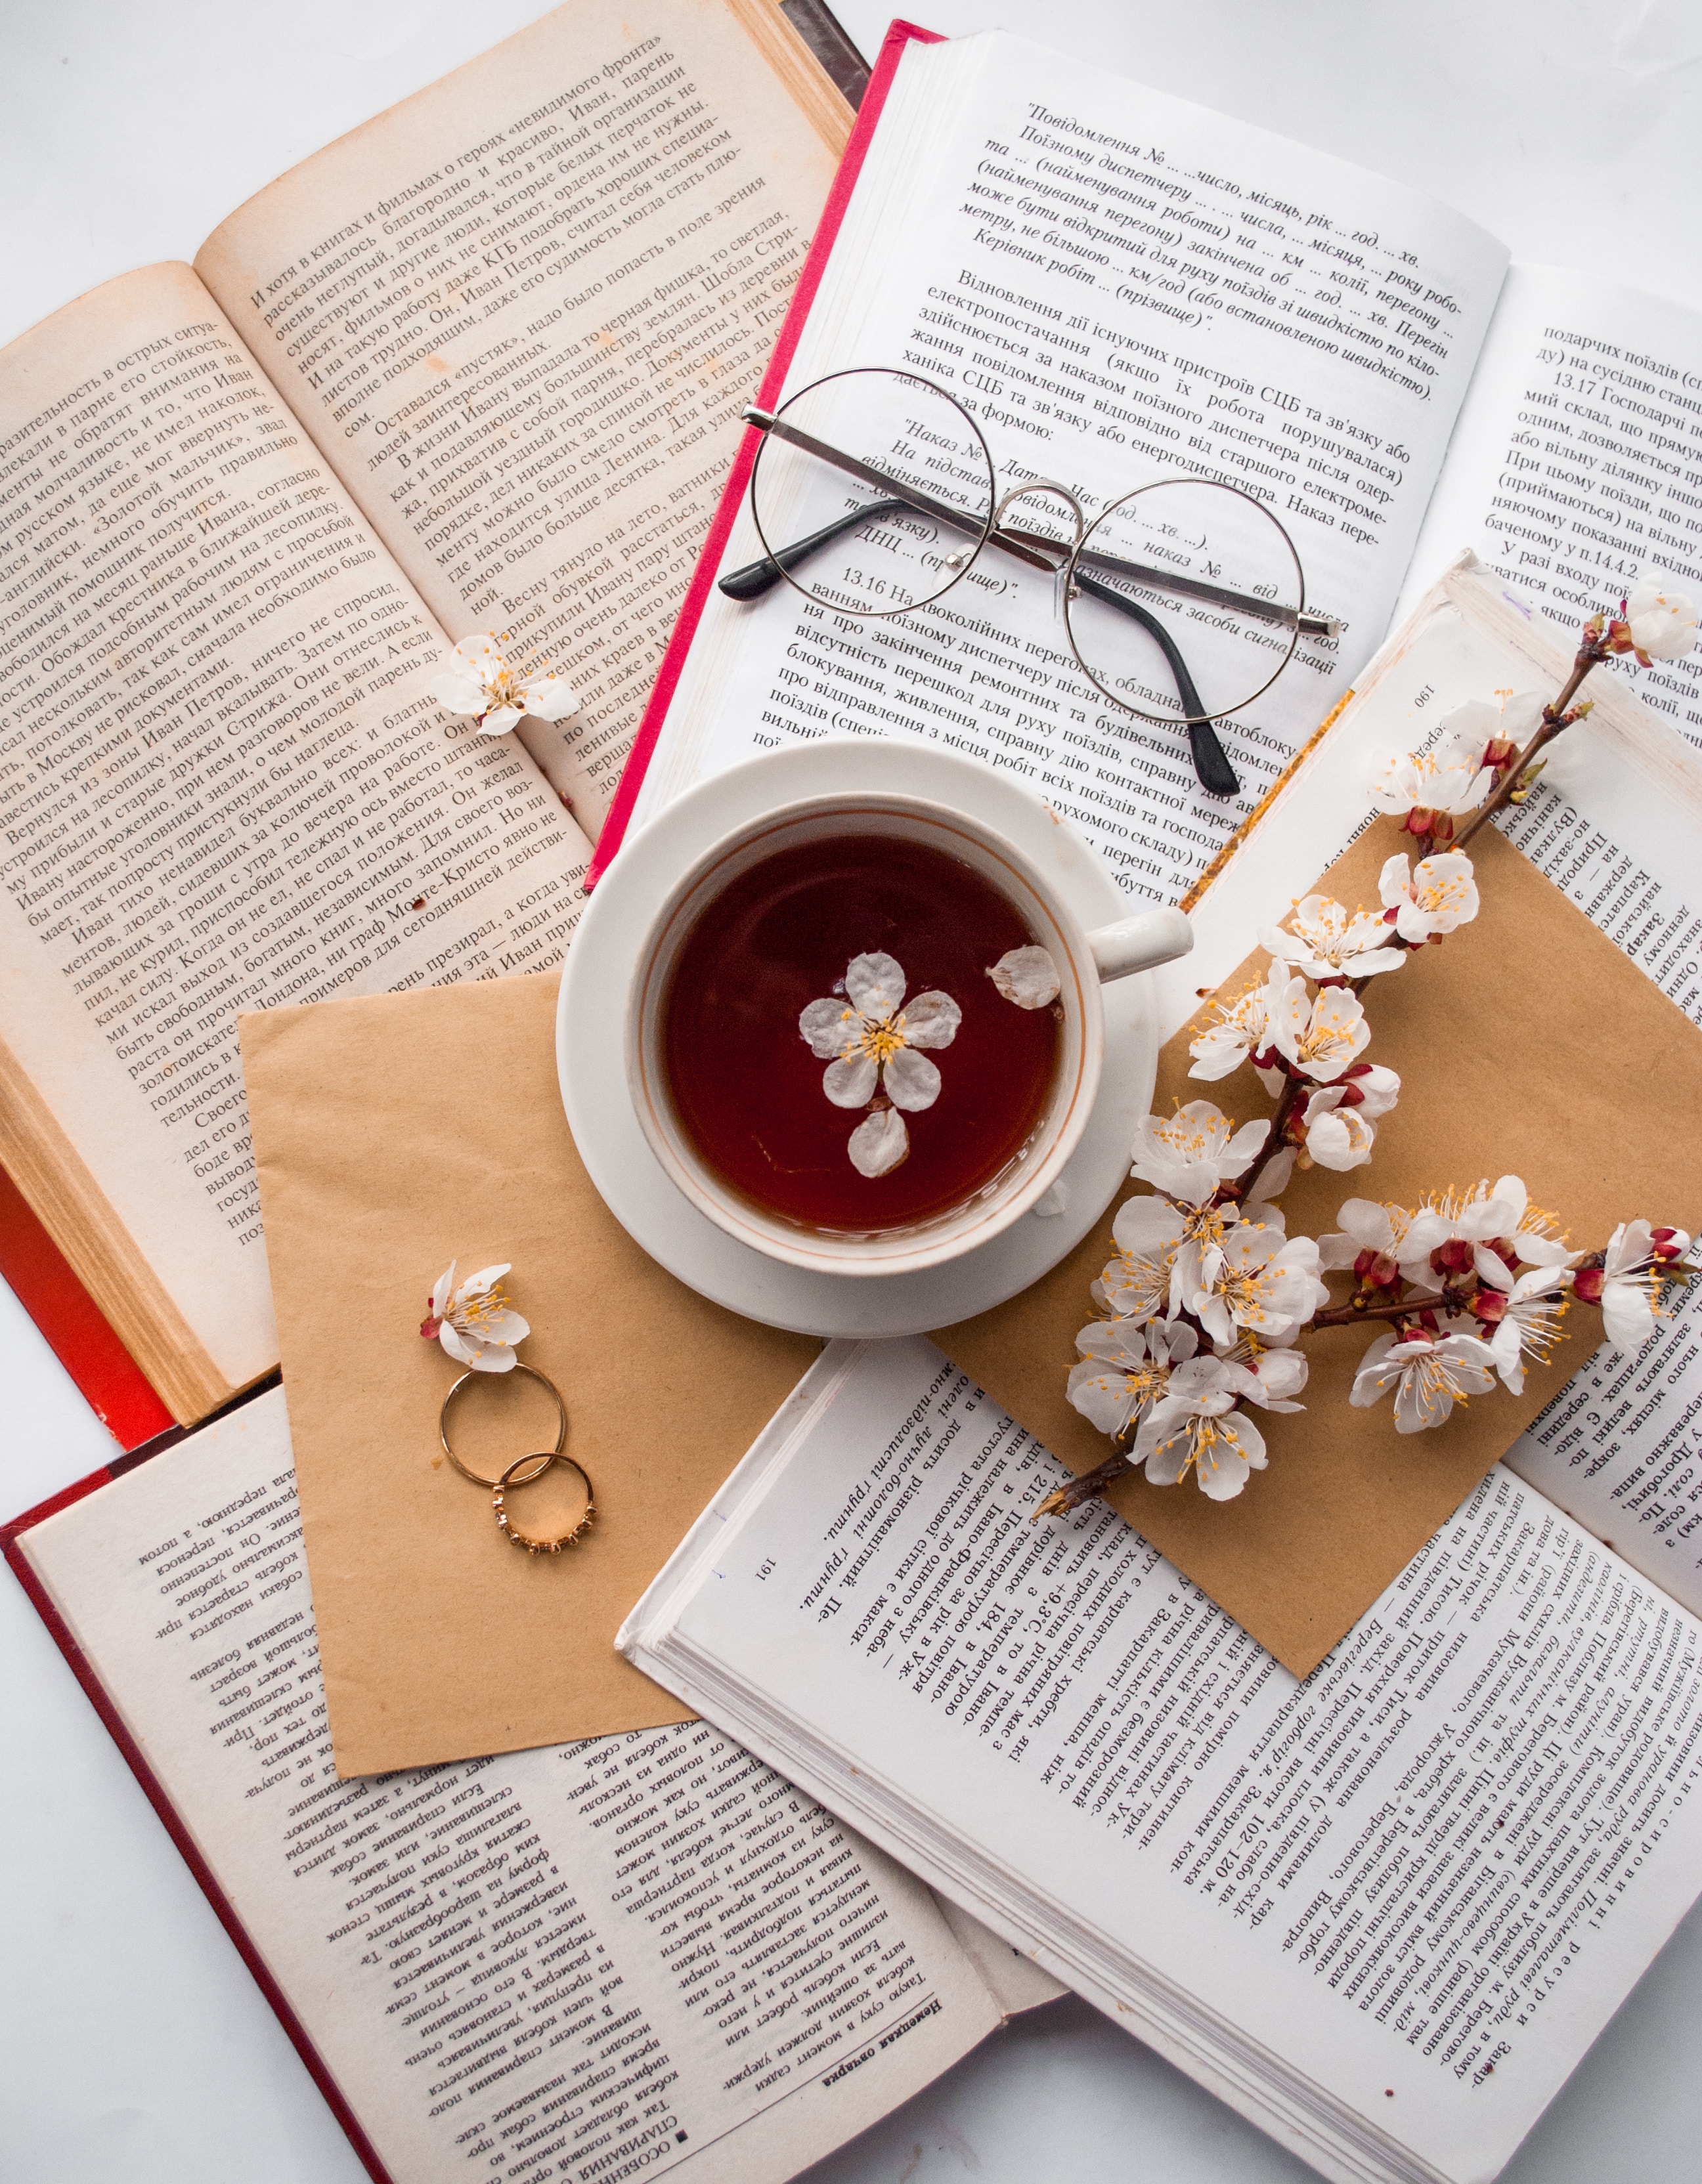 cup, books, flowers, rings, miscellanea, miscellaneous, glasses, spectacles 1080p